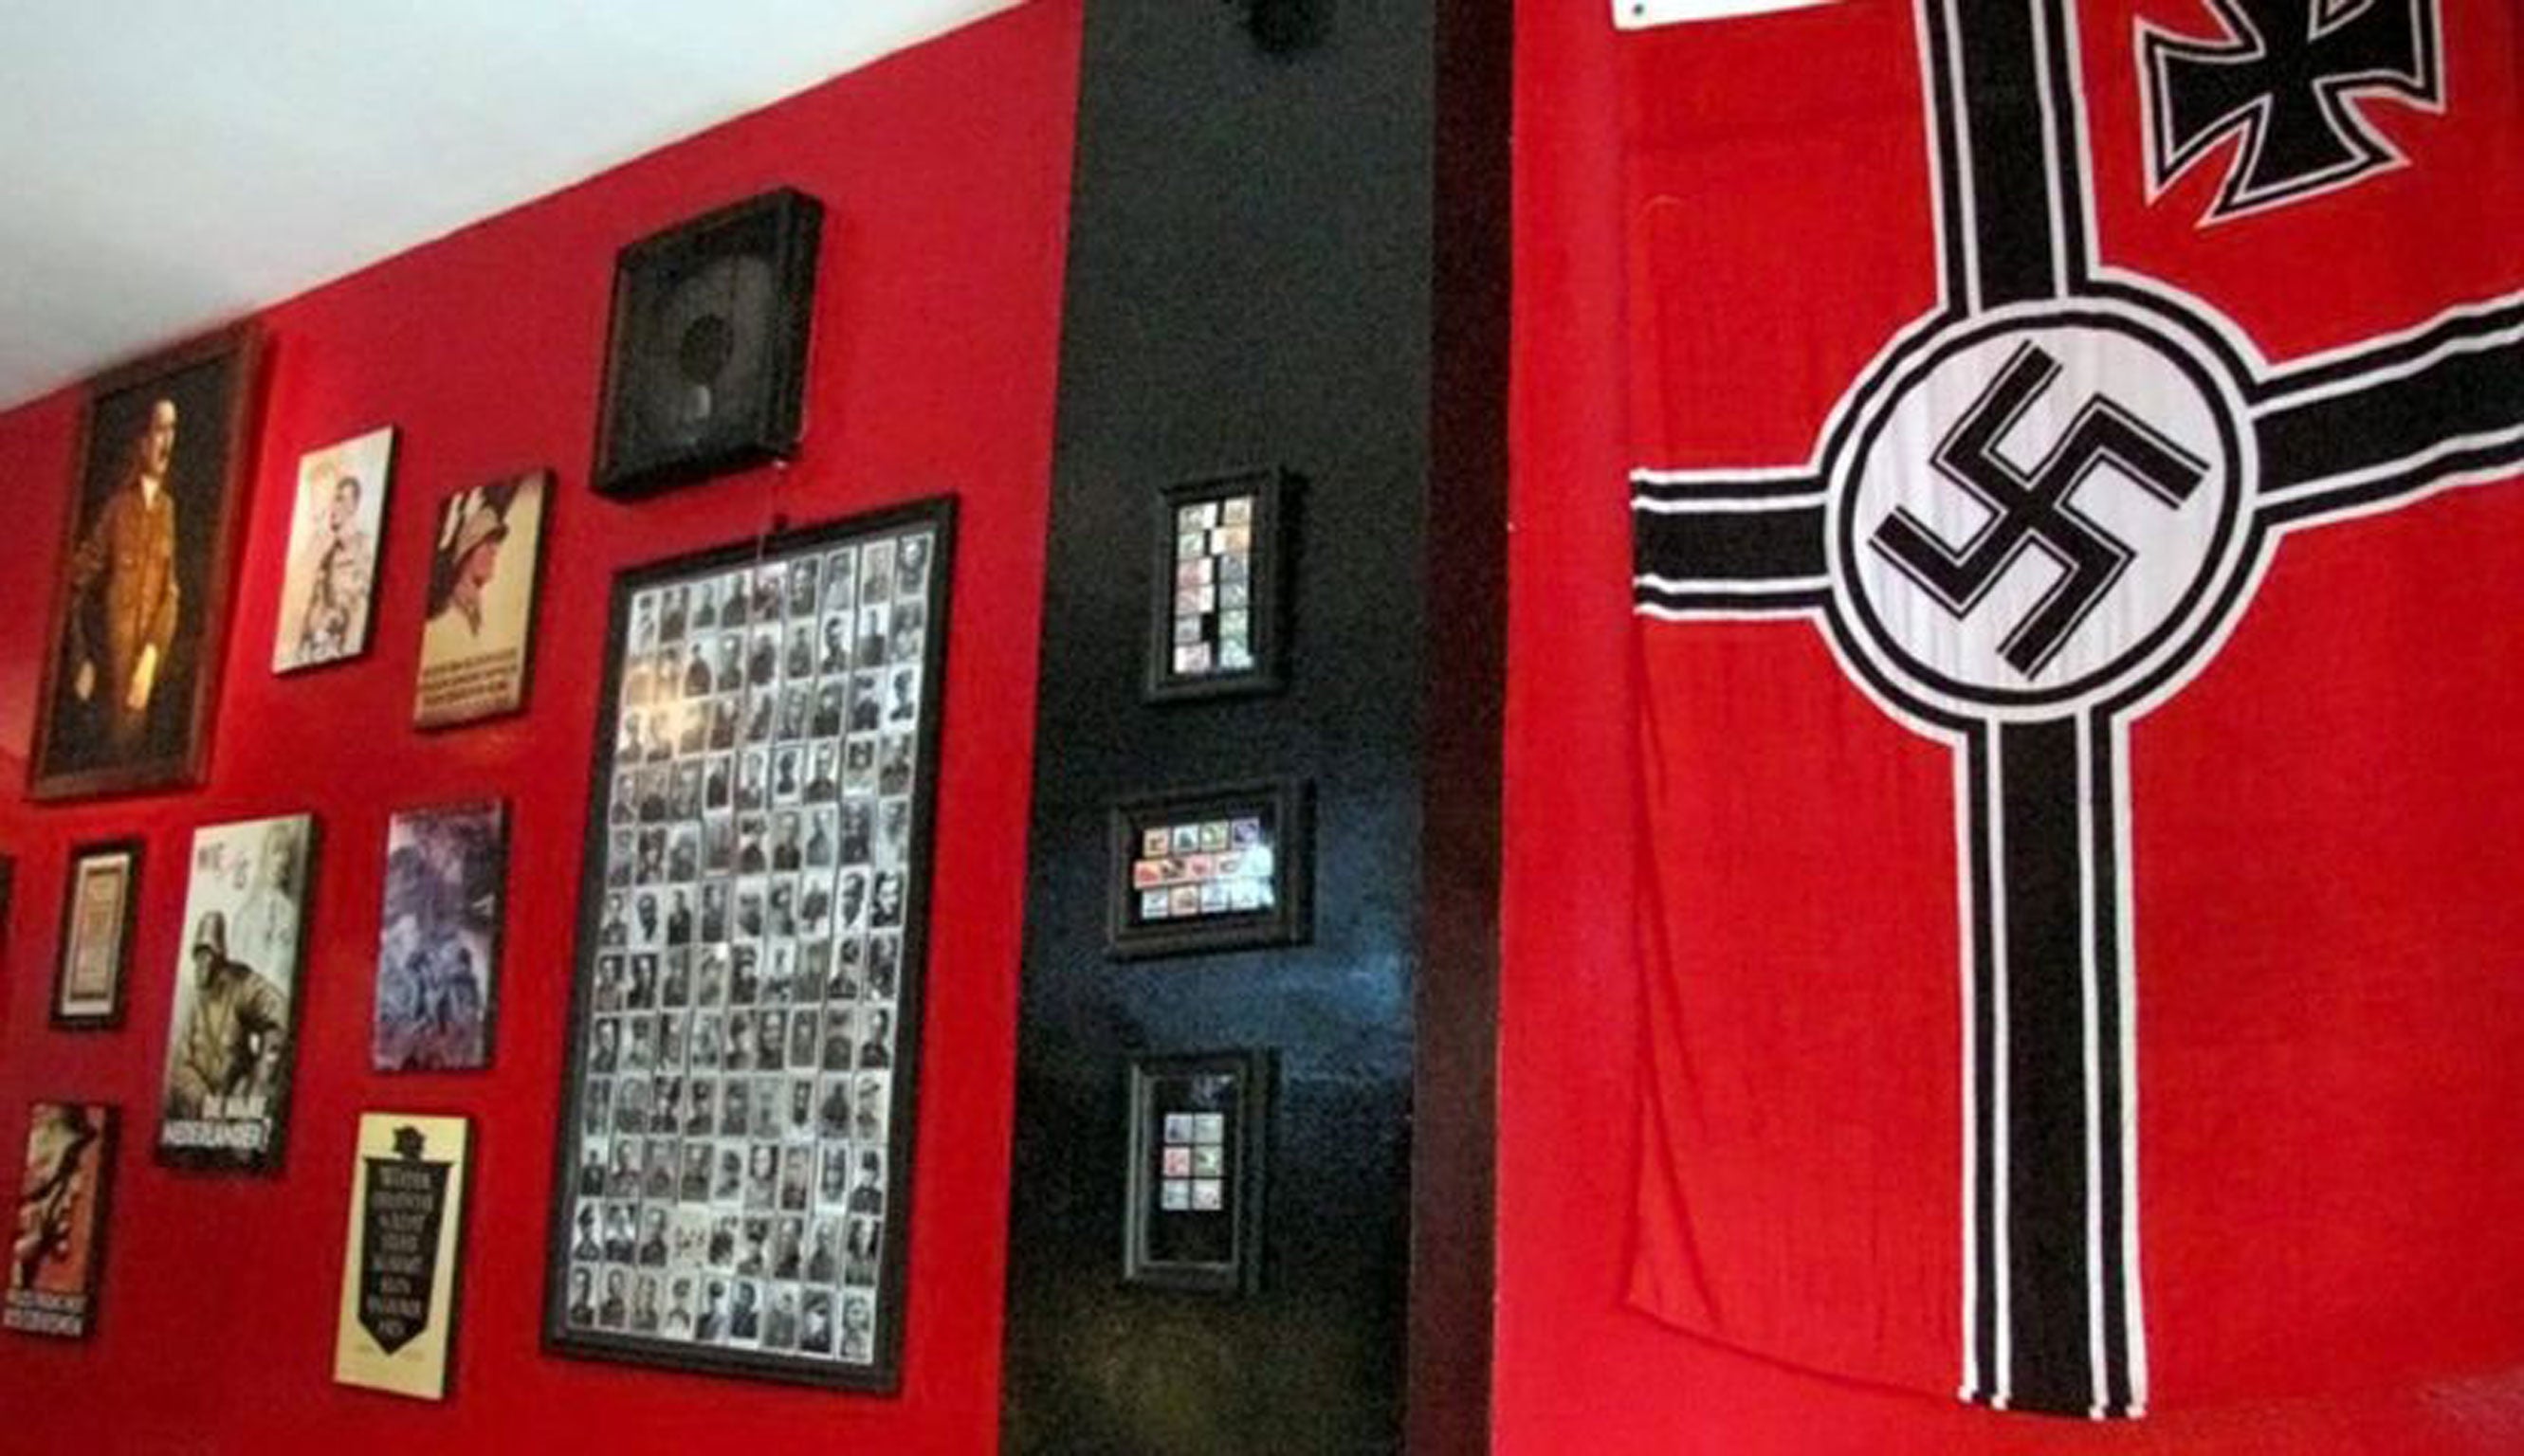 Nazi memorabilia hanging on a wall at Soldatenkaffe cafe in Bandung, Indonesia.